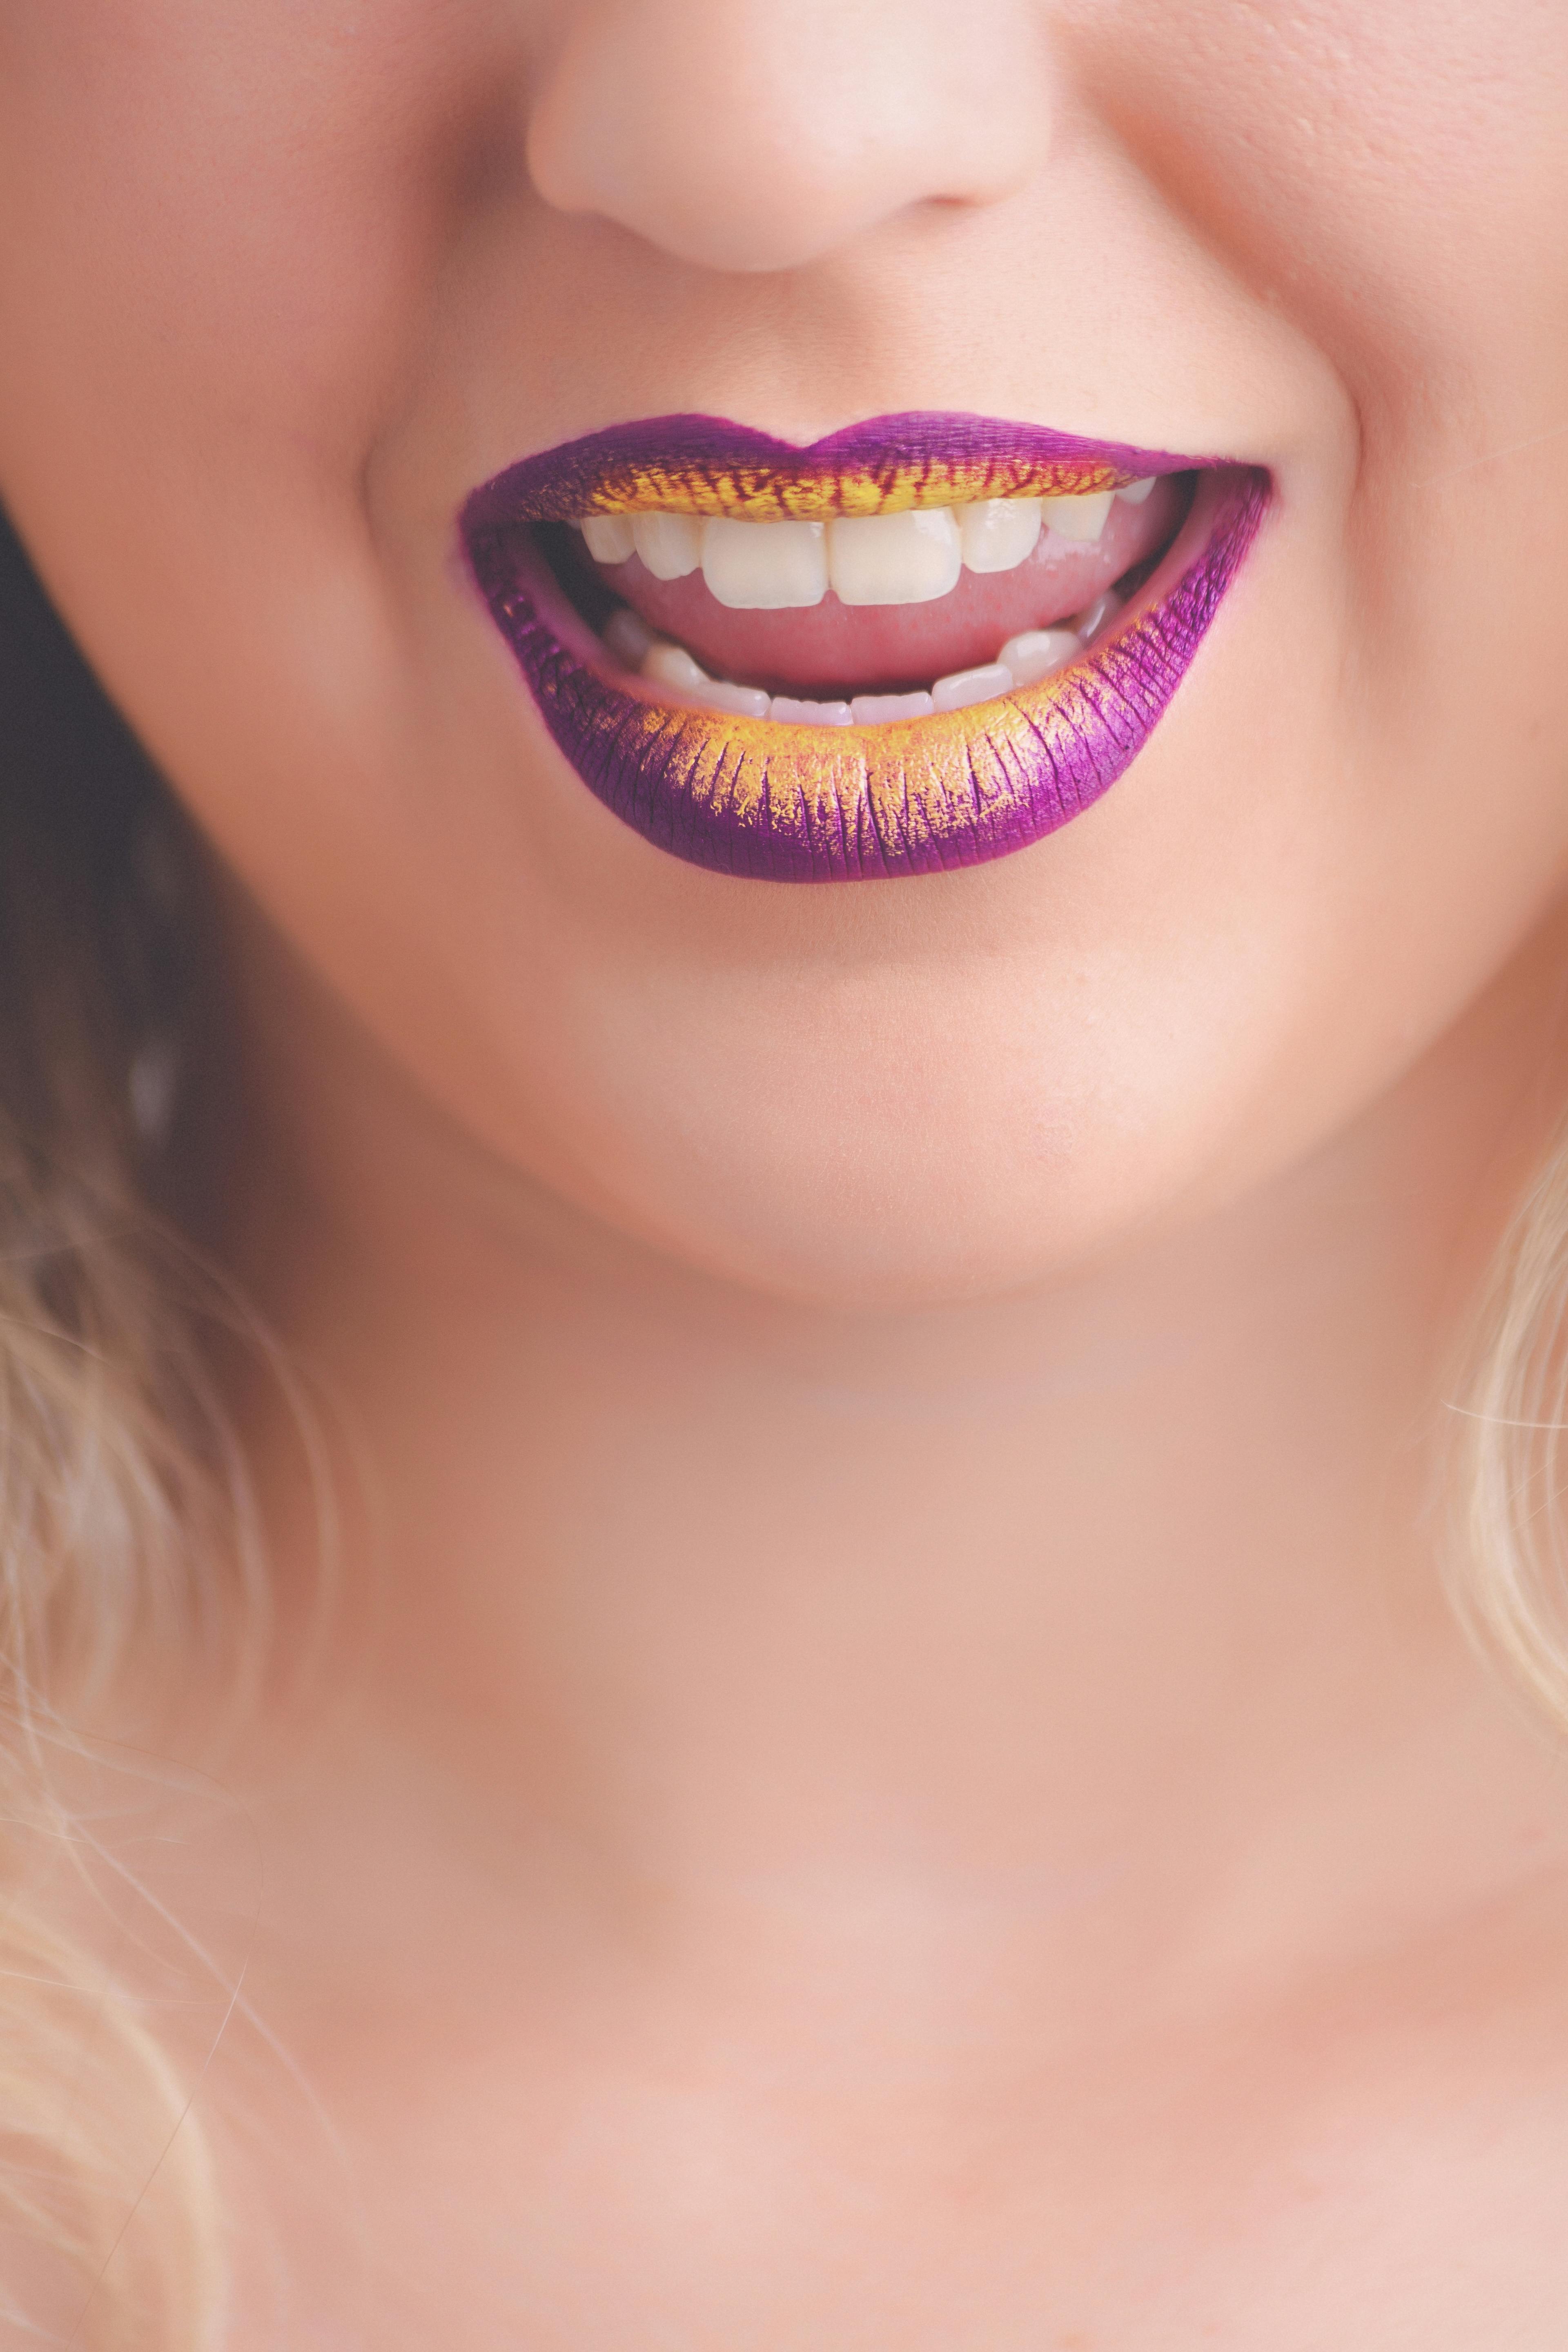 Download Woman With Purple And Yellow Lipstick Open Mouth Free Stock Photo PSD Mockup Templates